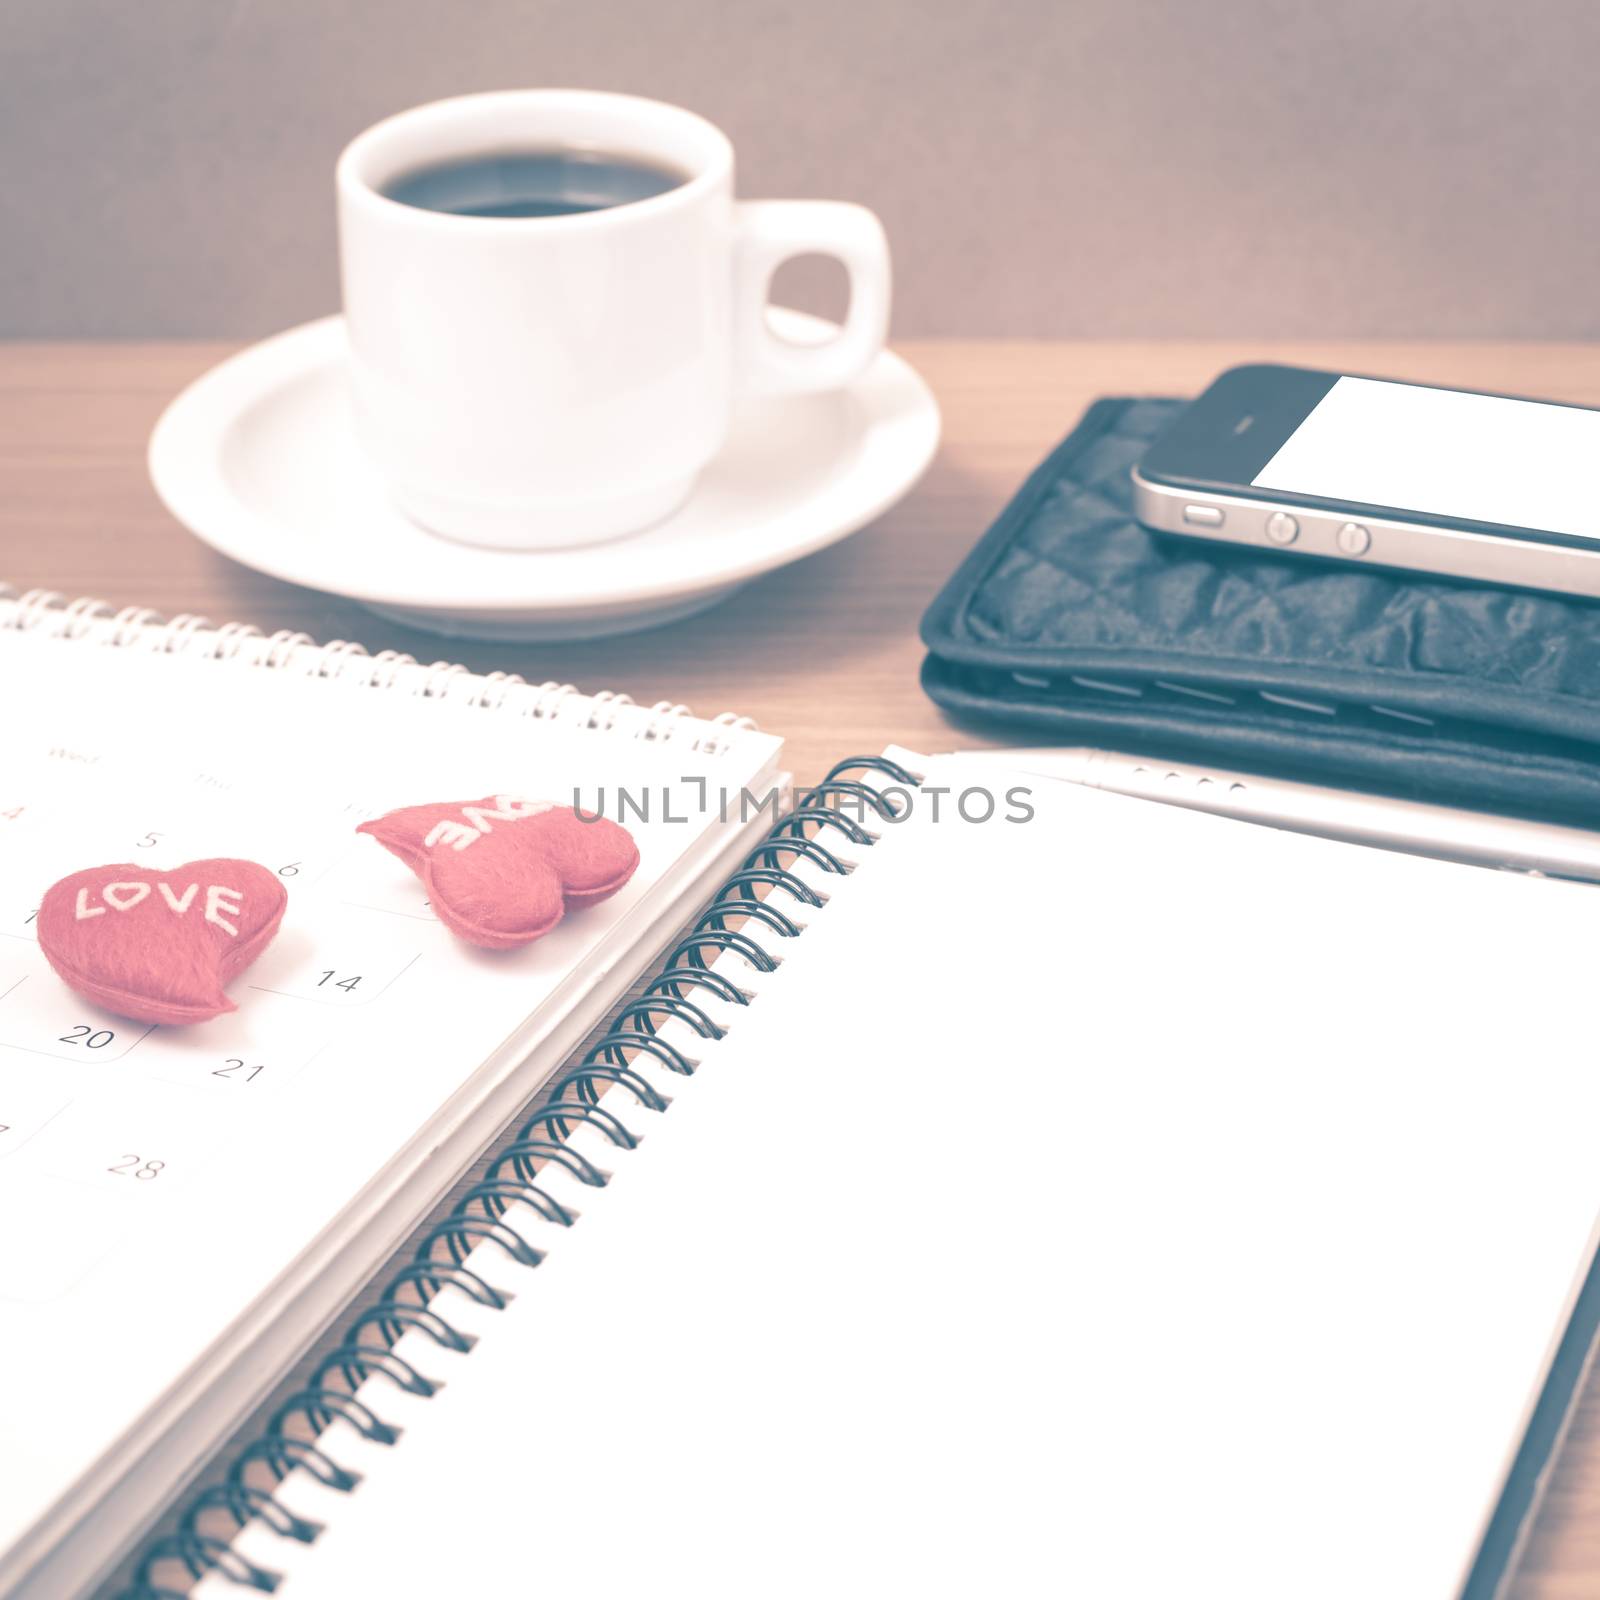 office desk : coffee with phone,wallet,calendar,heart,notepad vi by ammza12